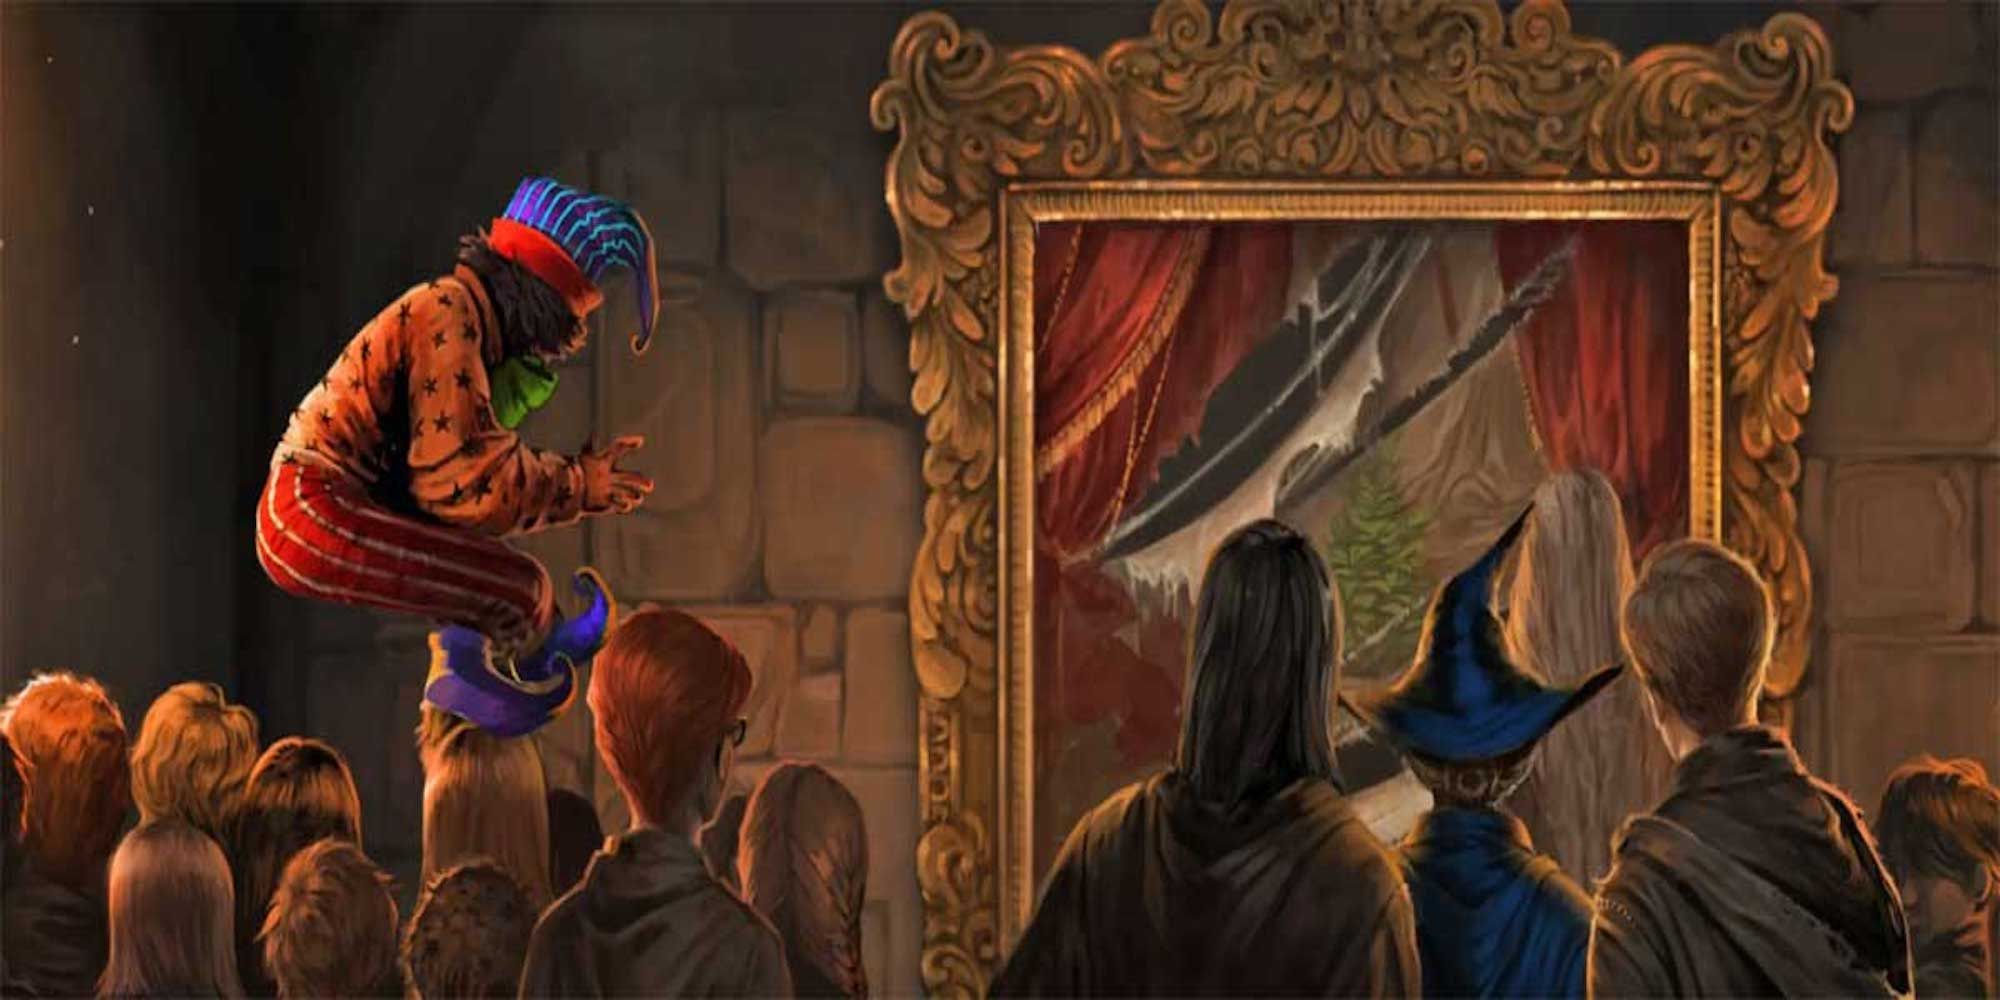 Peeves explaining what happened to the portrait of the Fat Lady